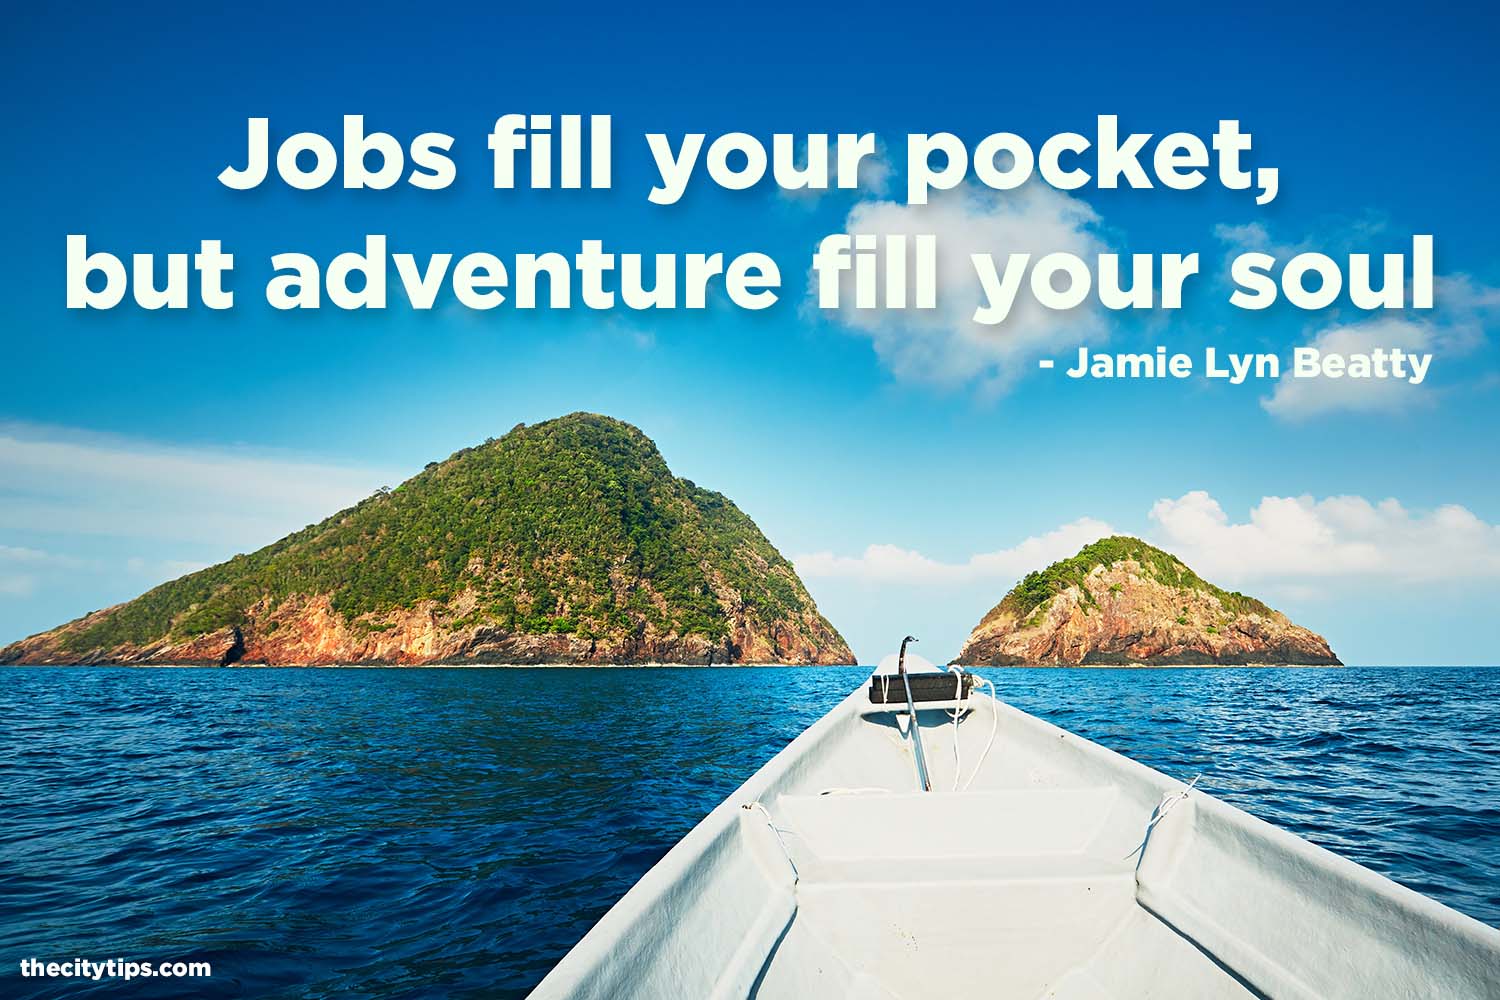 "Jobs fill your pocket, but adventures fill your soul." by Jamie Lyn Beatty